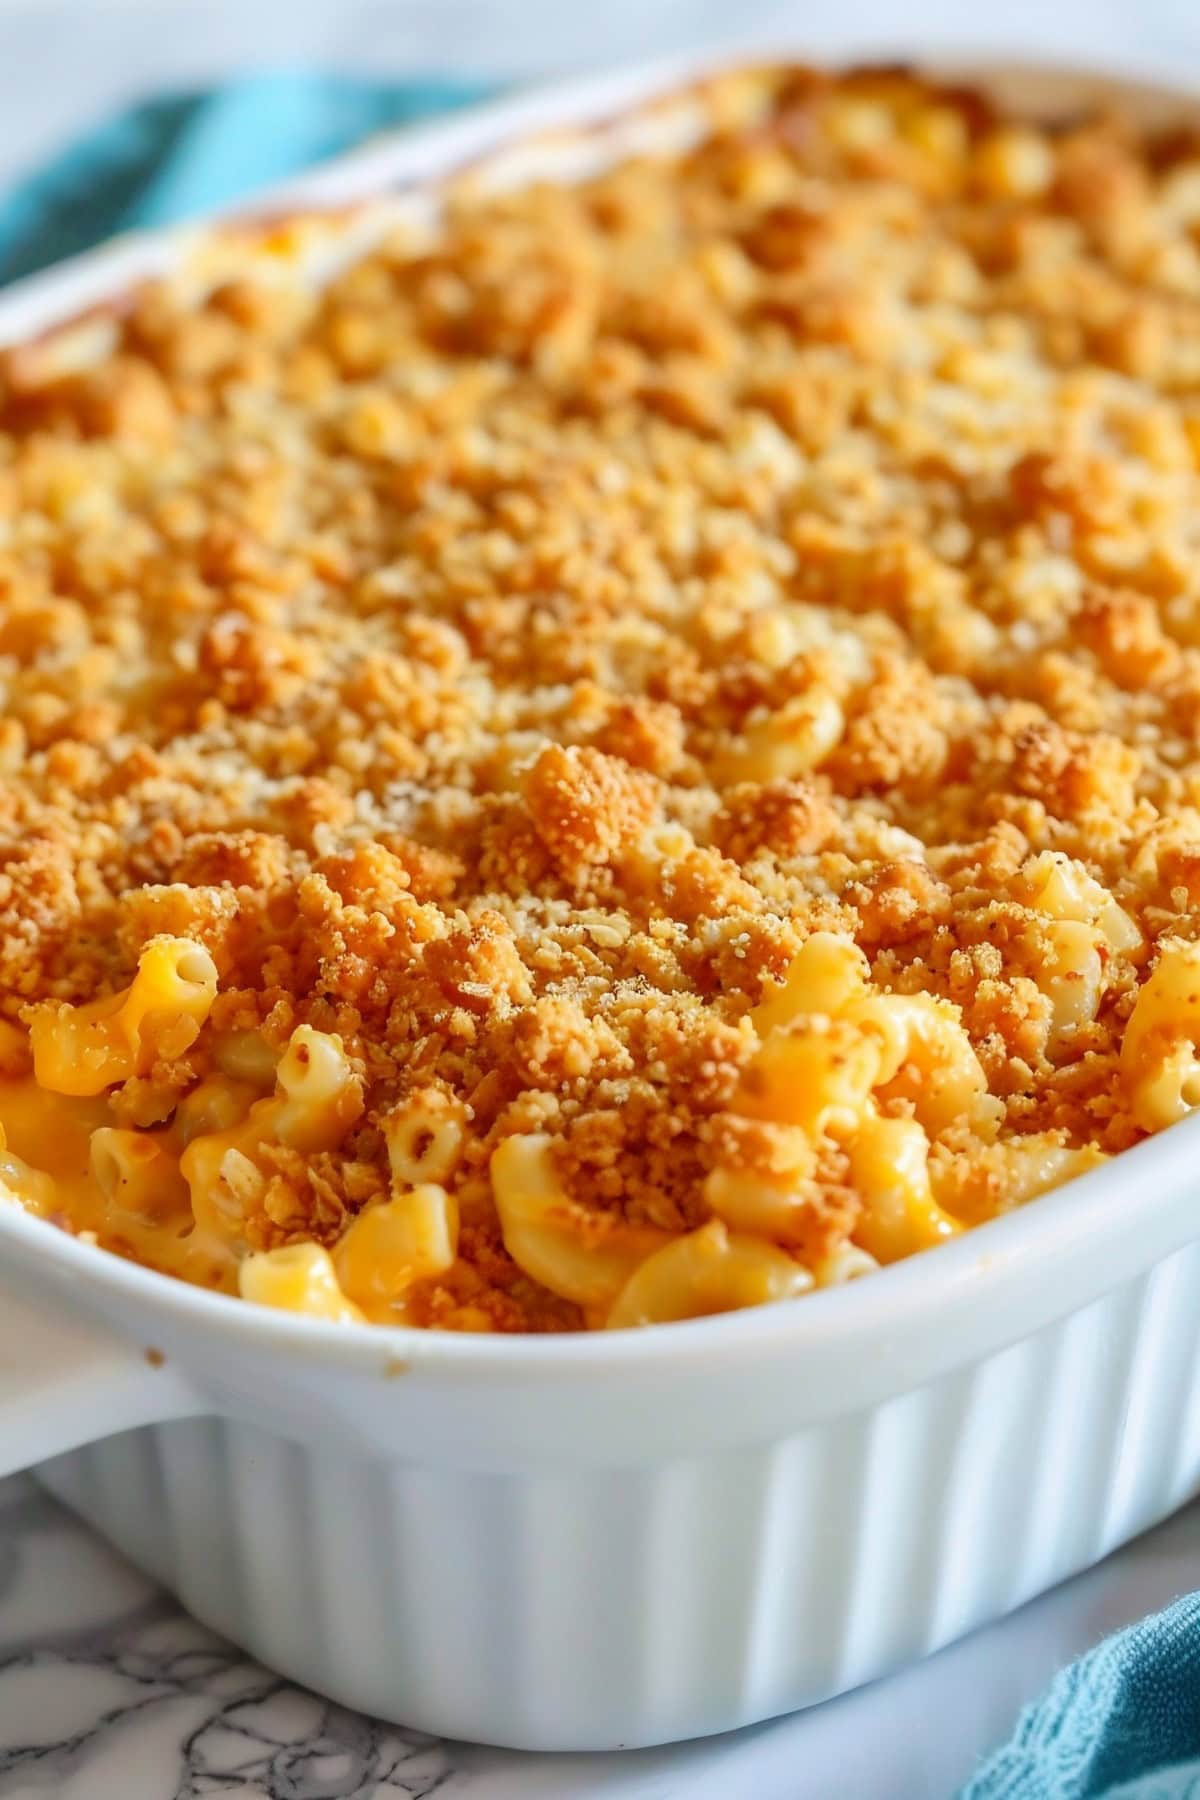 Super Close Up of Ritz Cracker Topping of Original Kraft Mac and Cheese in a Casserole Dish